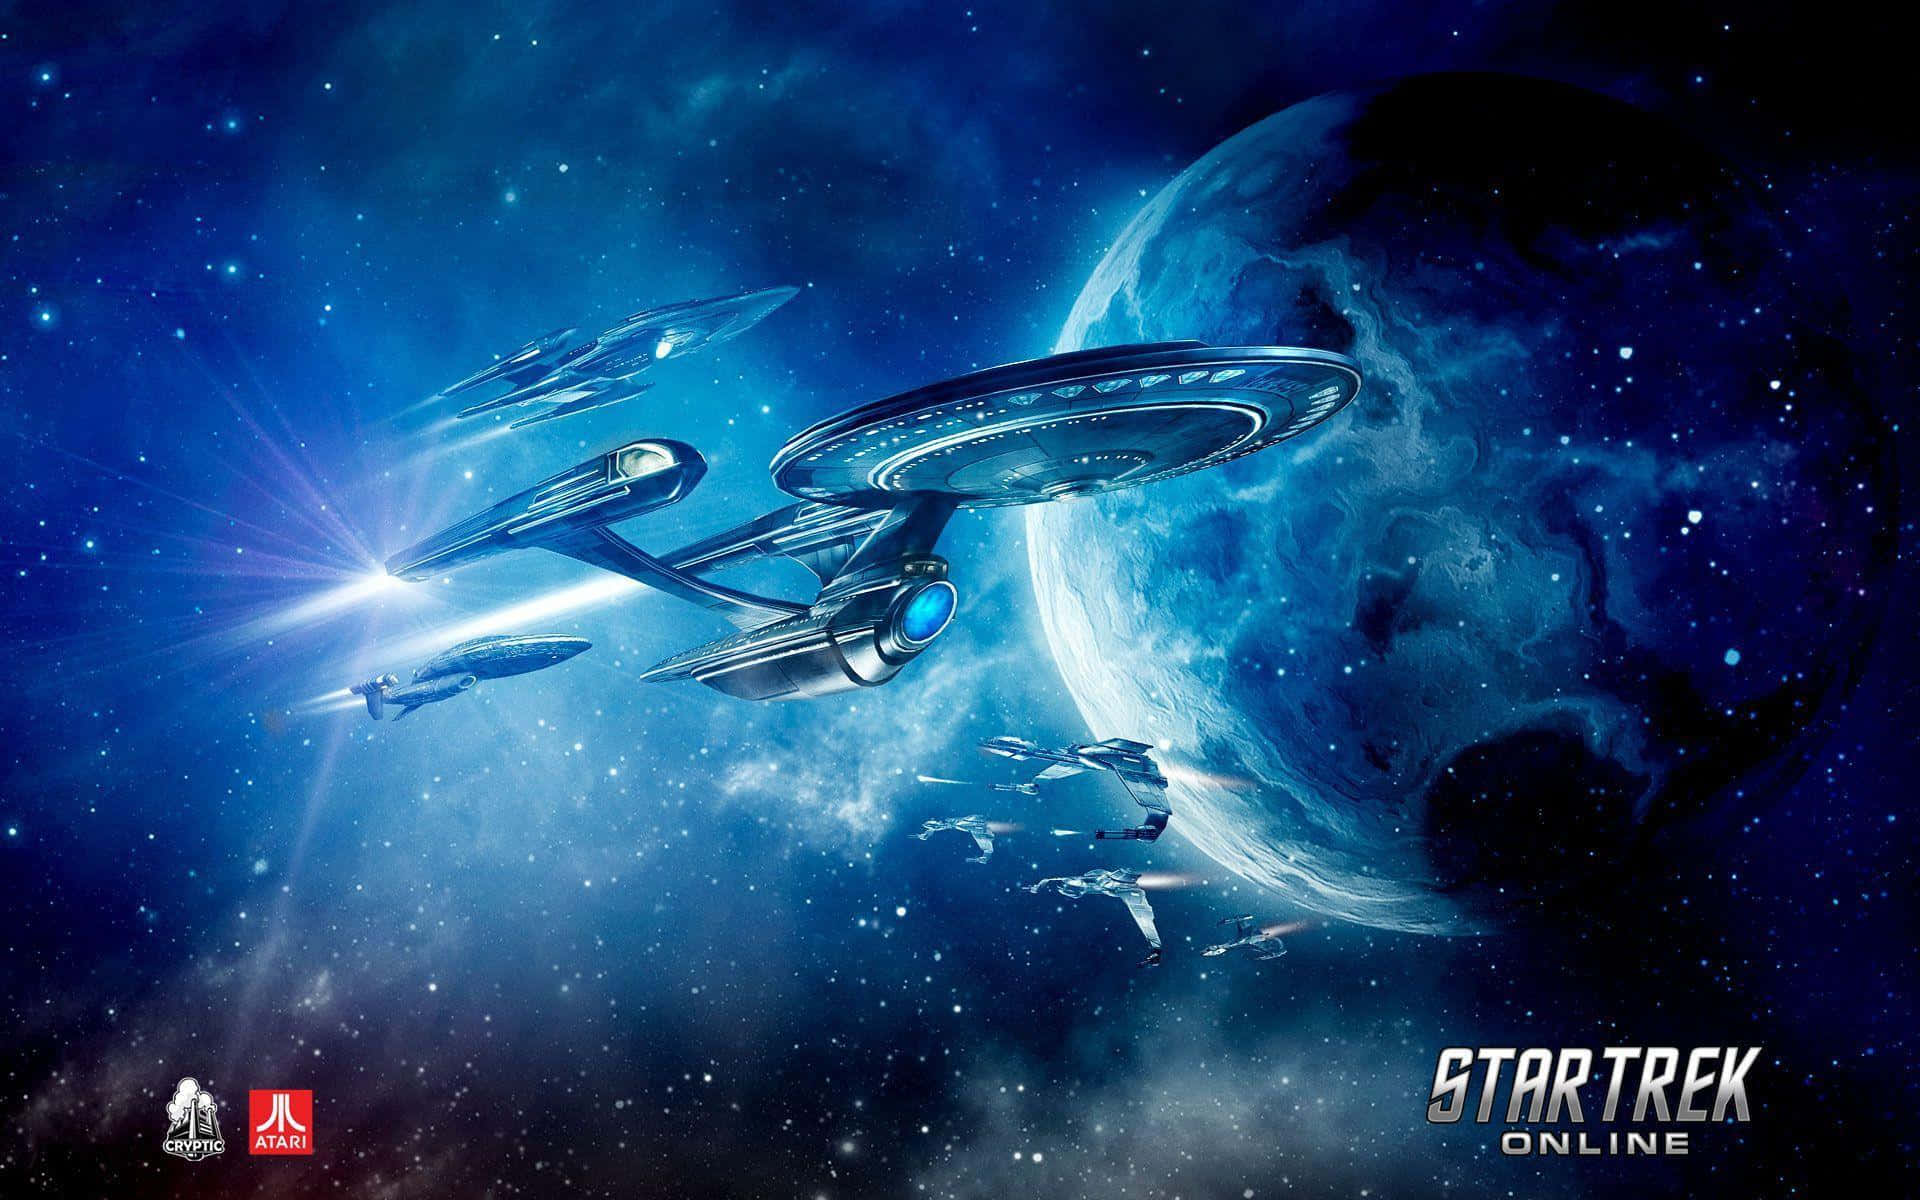 "Explore the Final Frontier and Beyond on Star Trek Zoom"